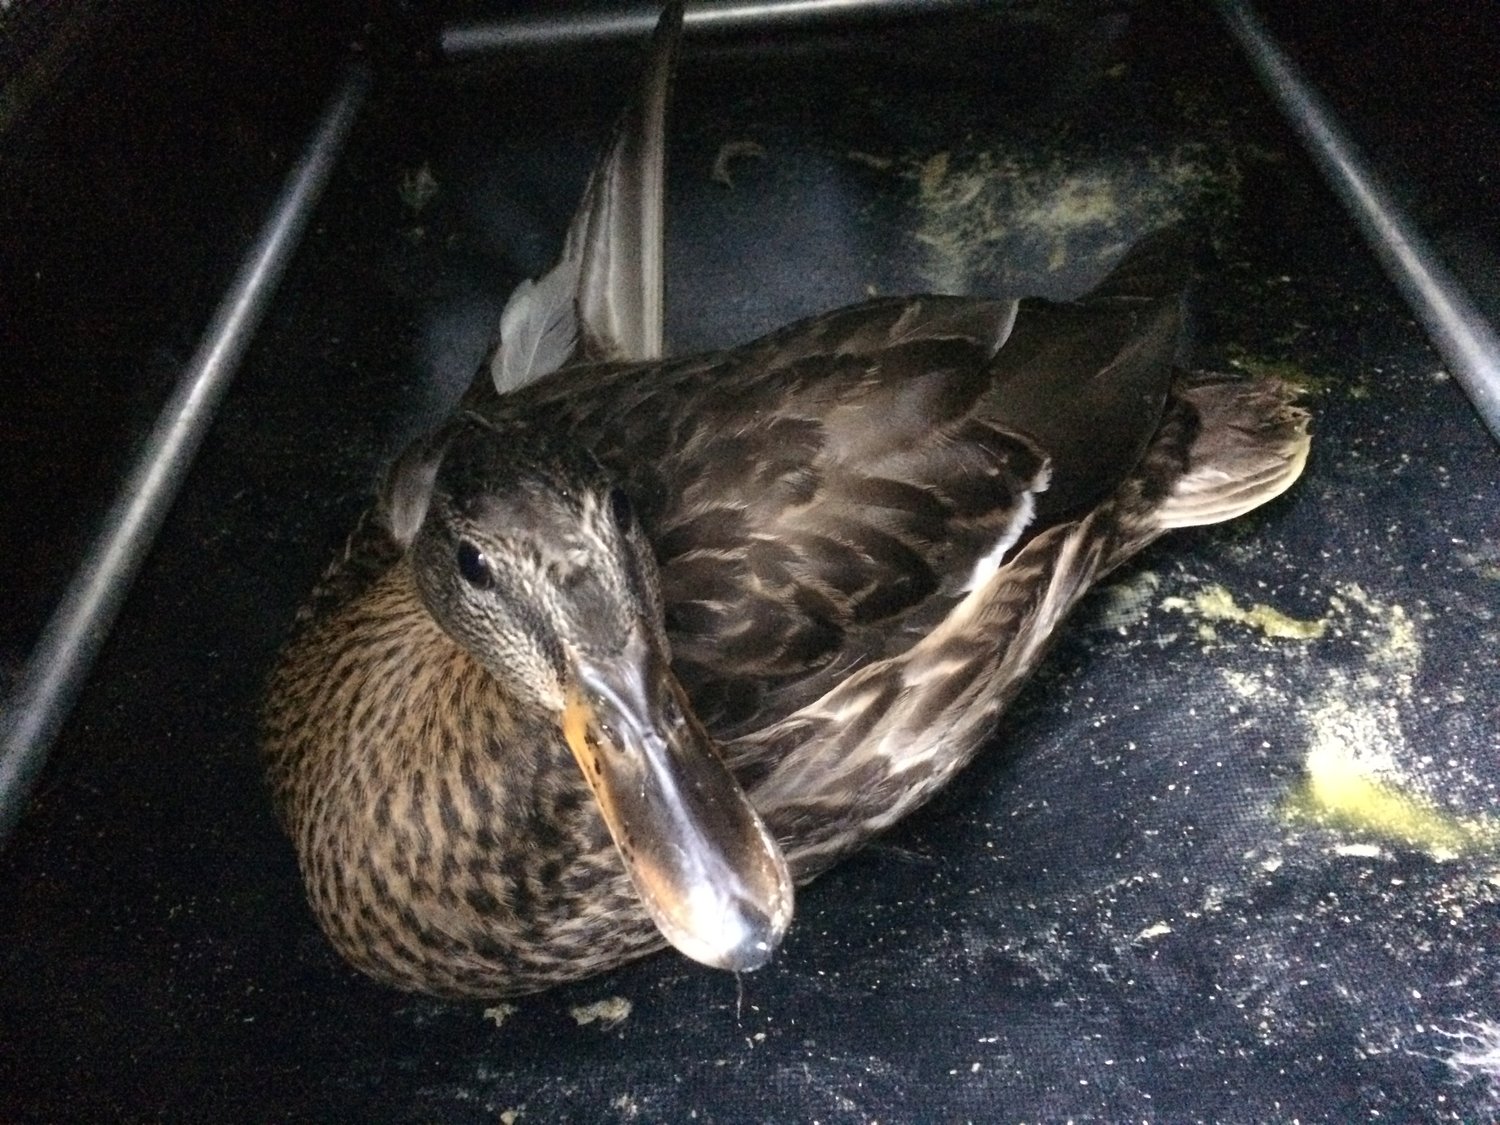 This female mallard got a second chance to resume her wild life after colliding with a car in Pike County, PA. I transported her to the Pocono Wildlife Rehabilitation and Education Center in Stroudsburg for treatment.